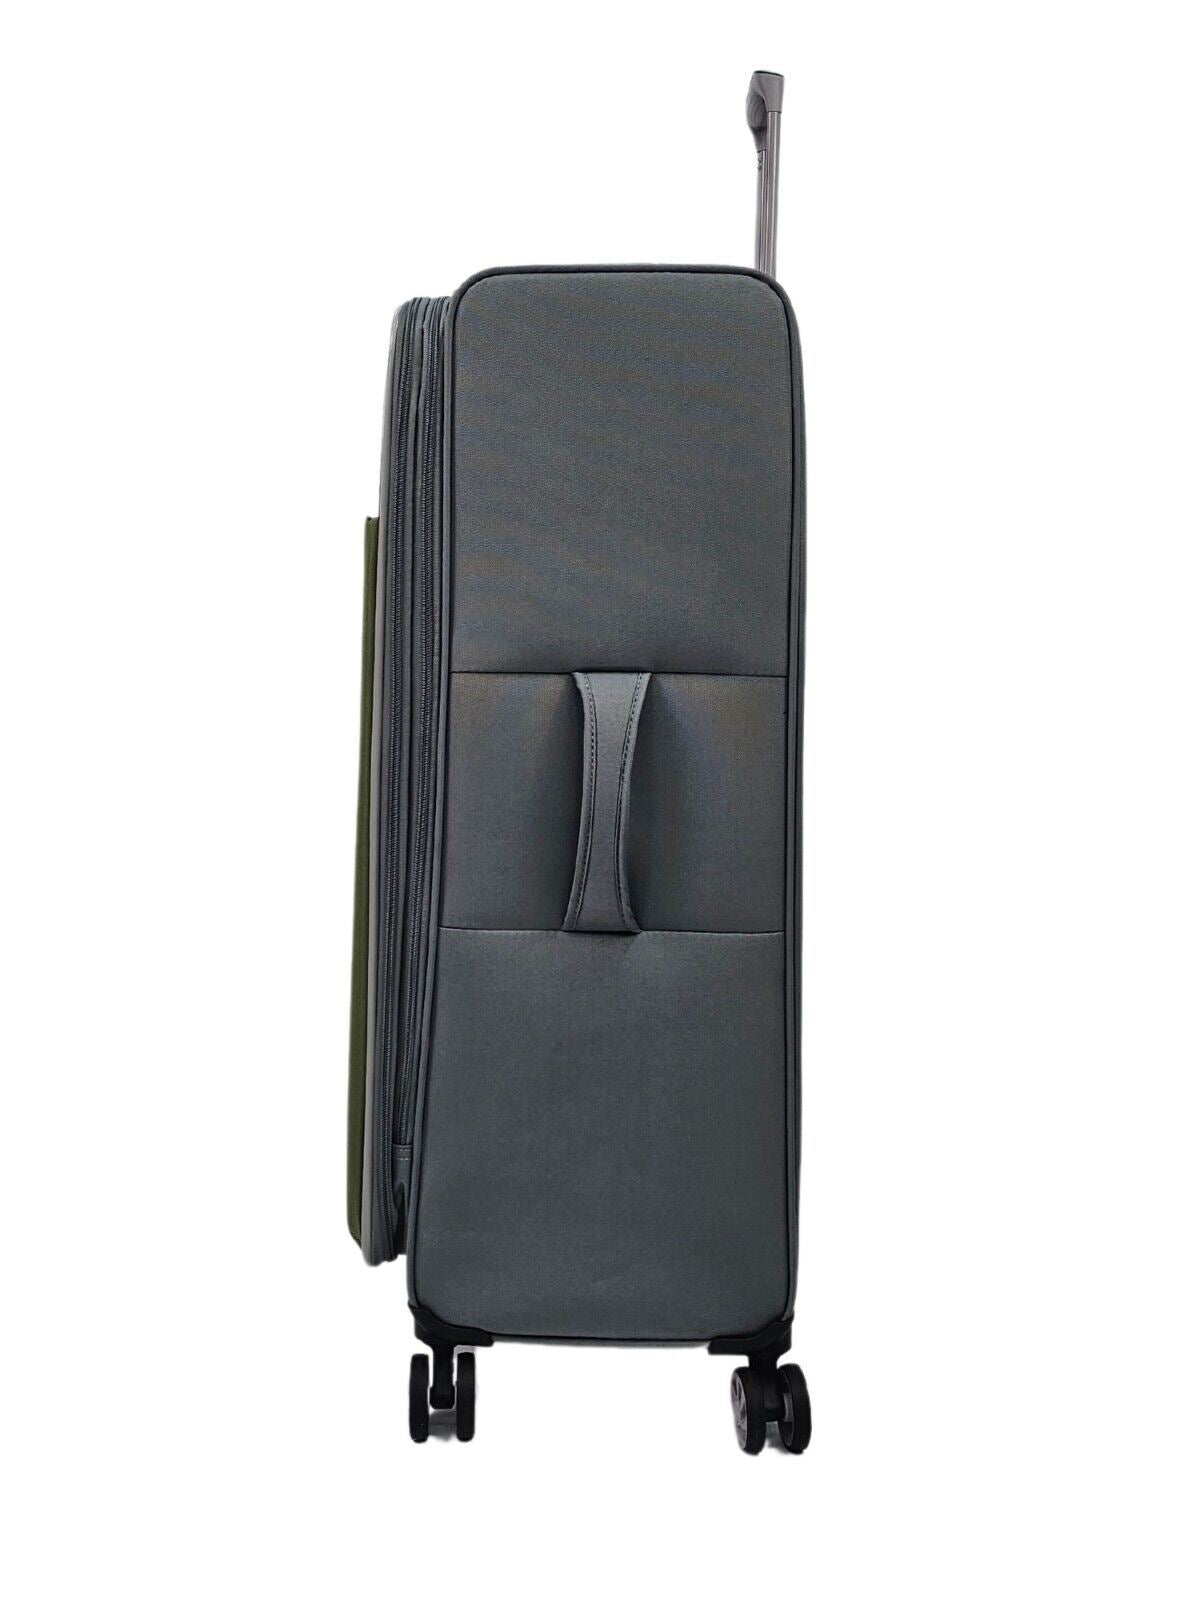 Lightweight Grey Cabin Suitcases 4 Wheel Luggage Travel Bag